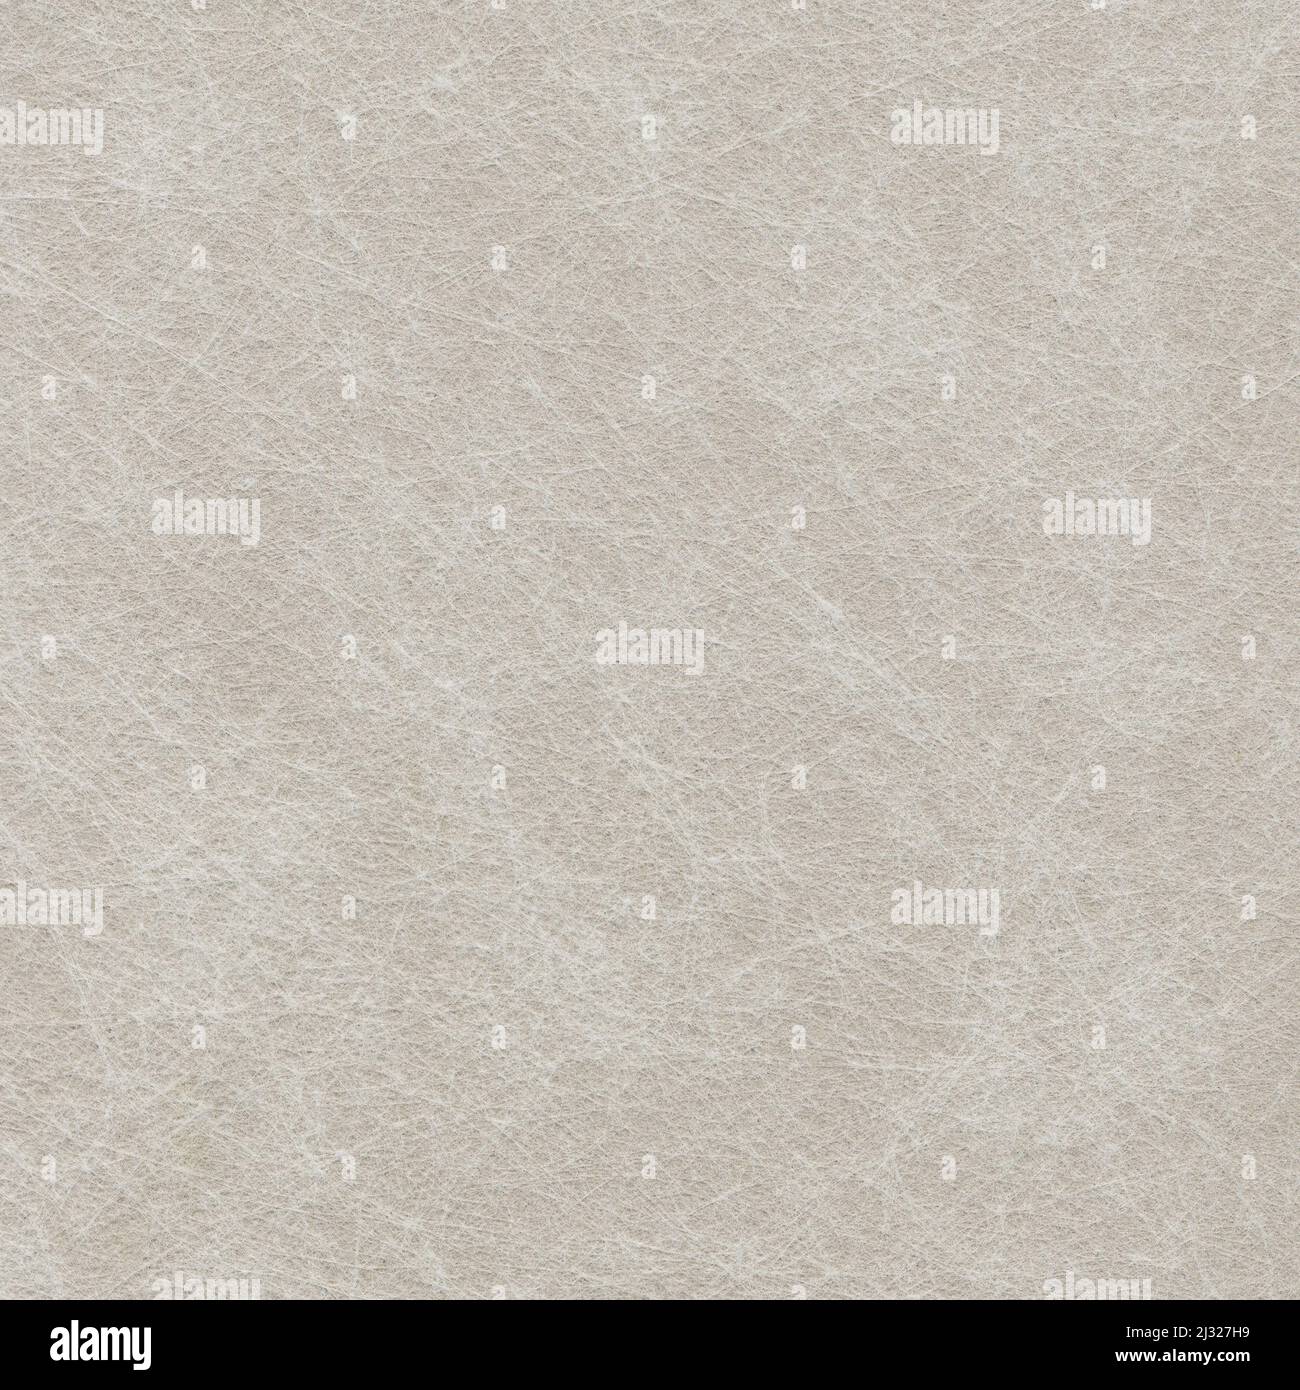 Cream paper background with white pattern Stock Photo